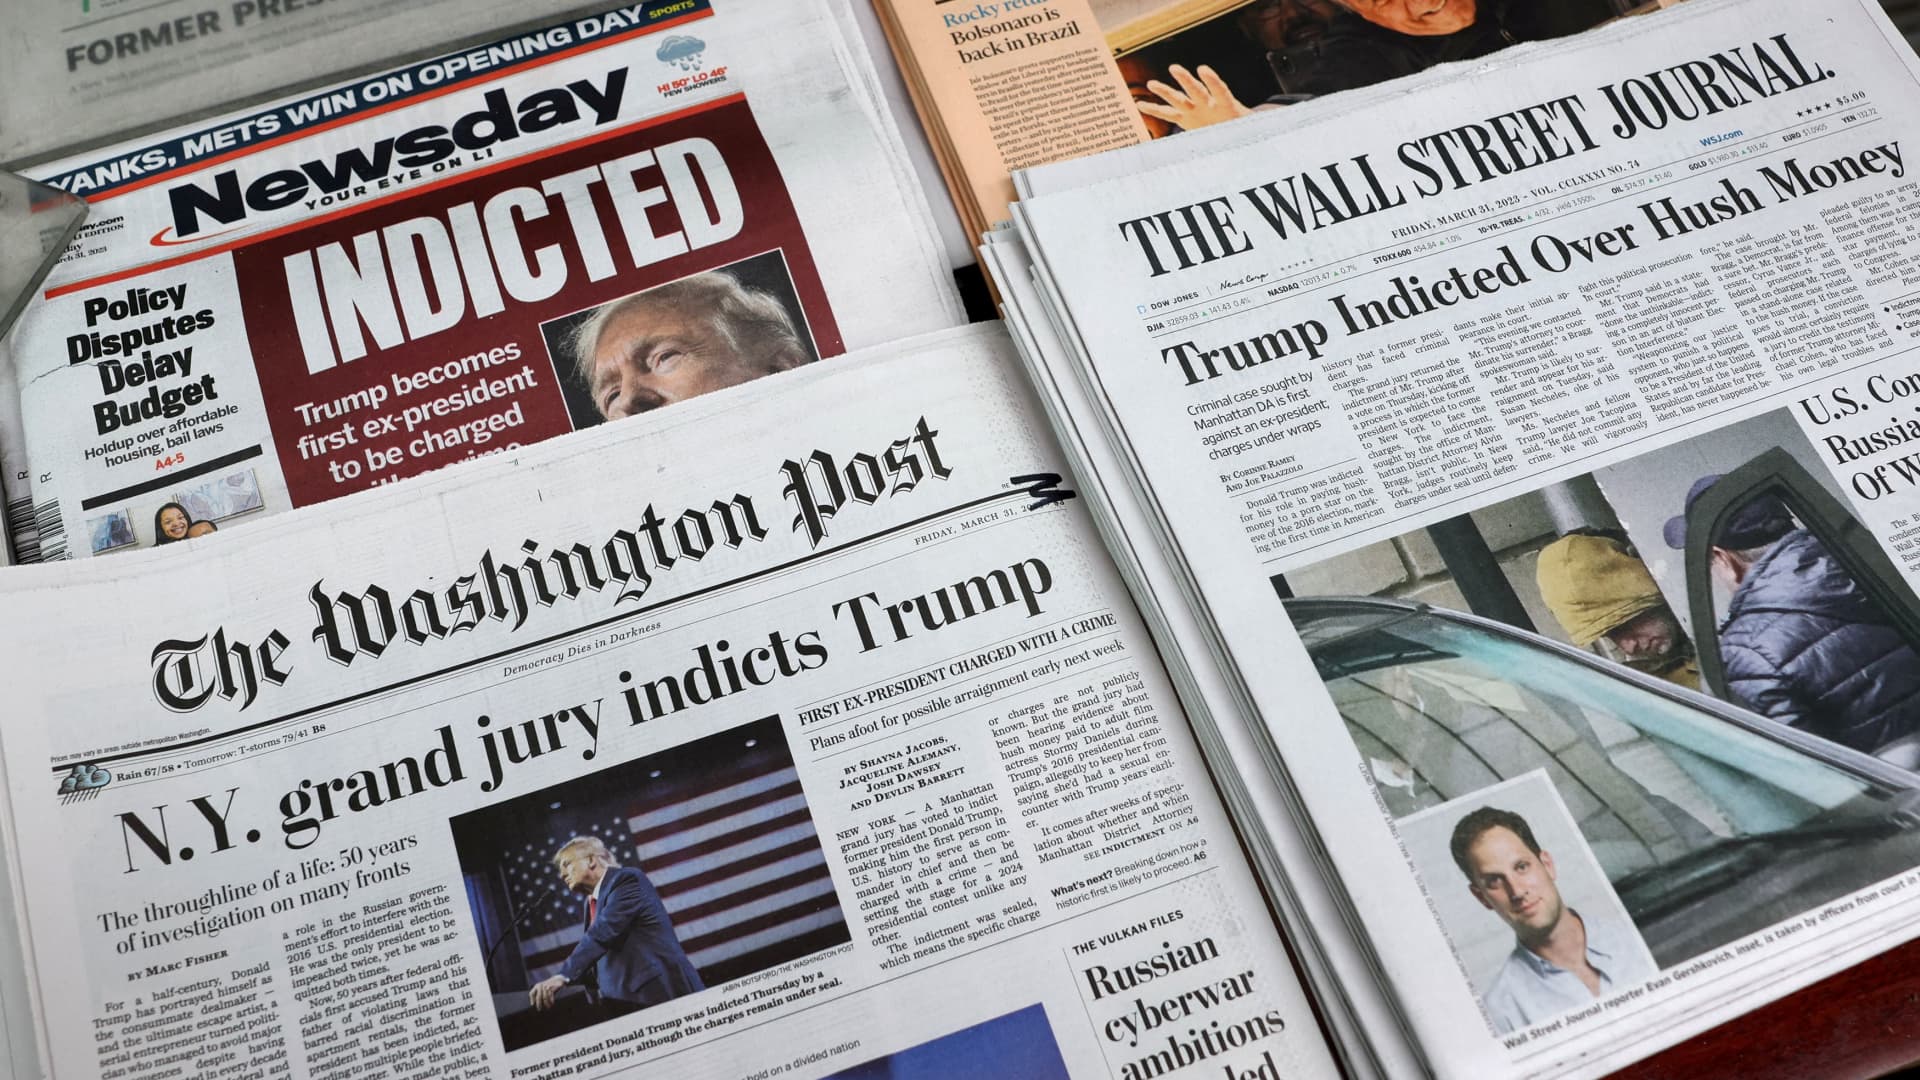 New York newspapers are displayed at a newsstand following former U.S. President Donald Trump's indictment by a Manhattan grand jury following a probe into hush money paid to porn star Stormy Daniels, in New York City, U.S. March 31, 2023. 